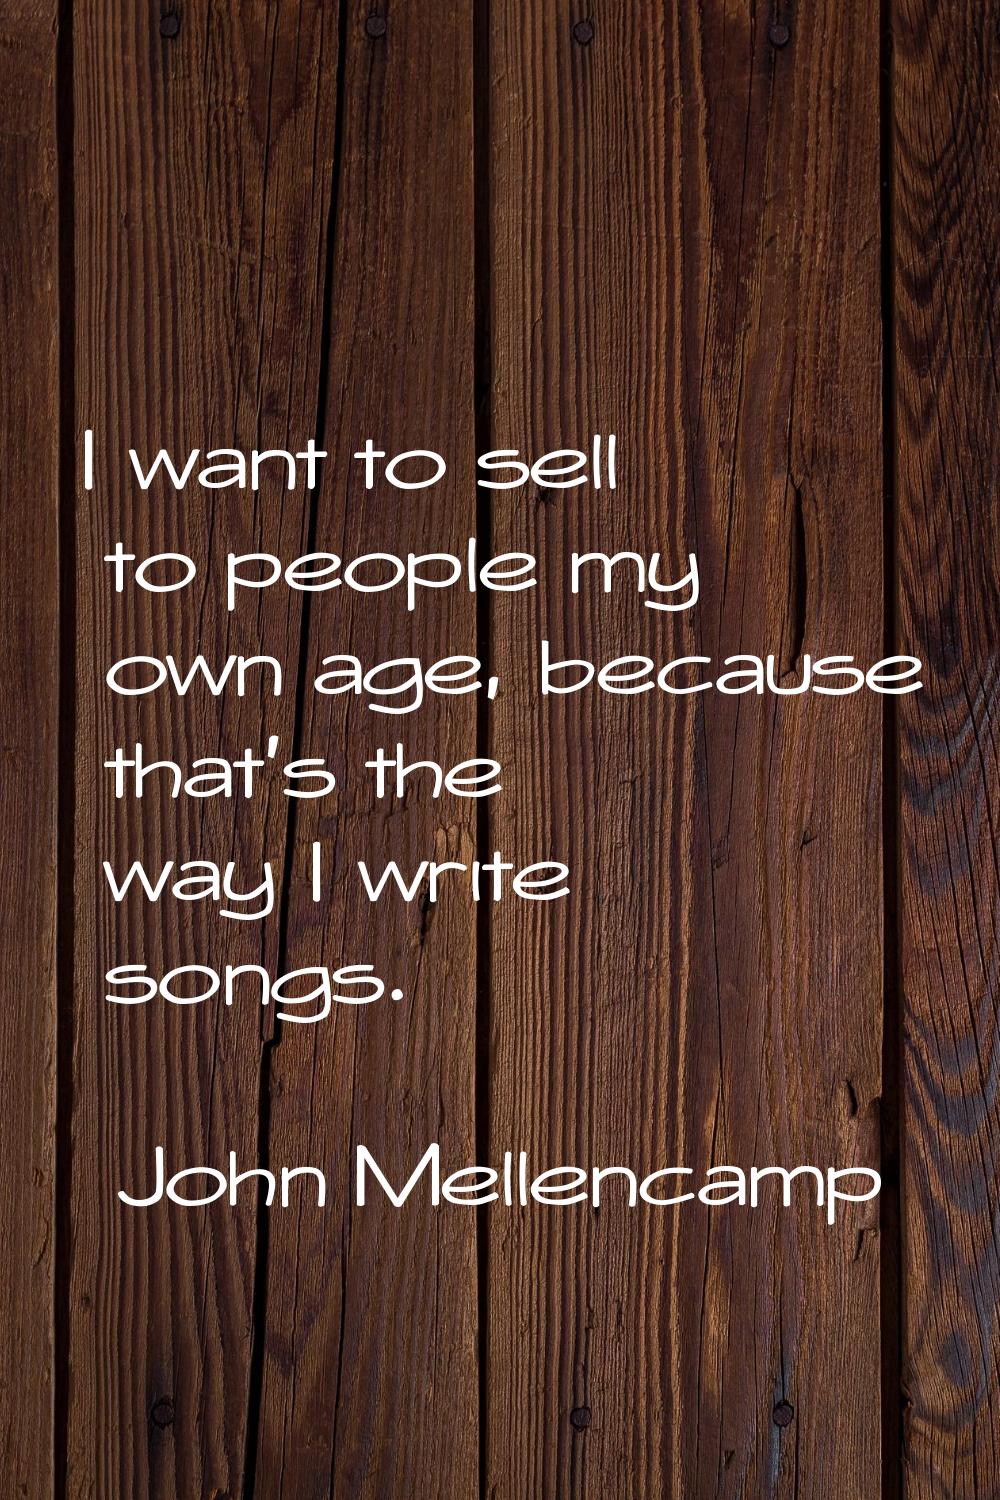 I want to sell to people my own age, because that's the way I write songs.